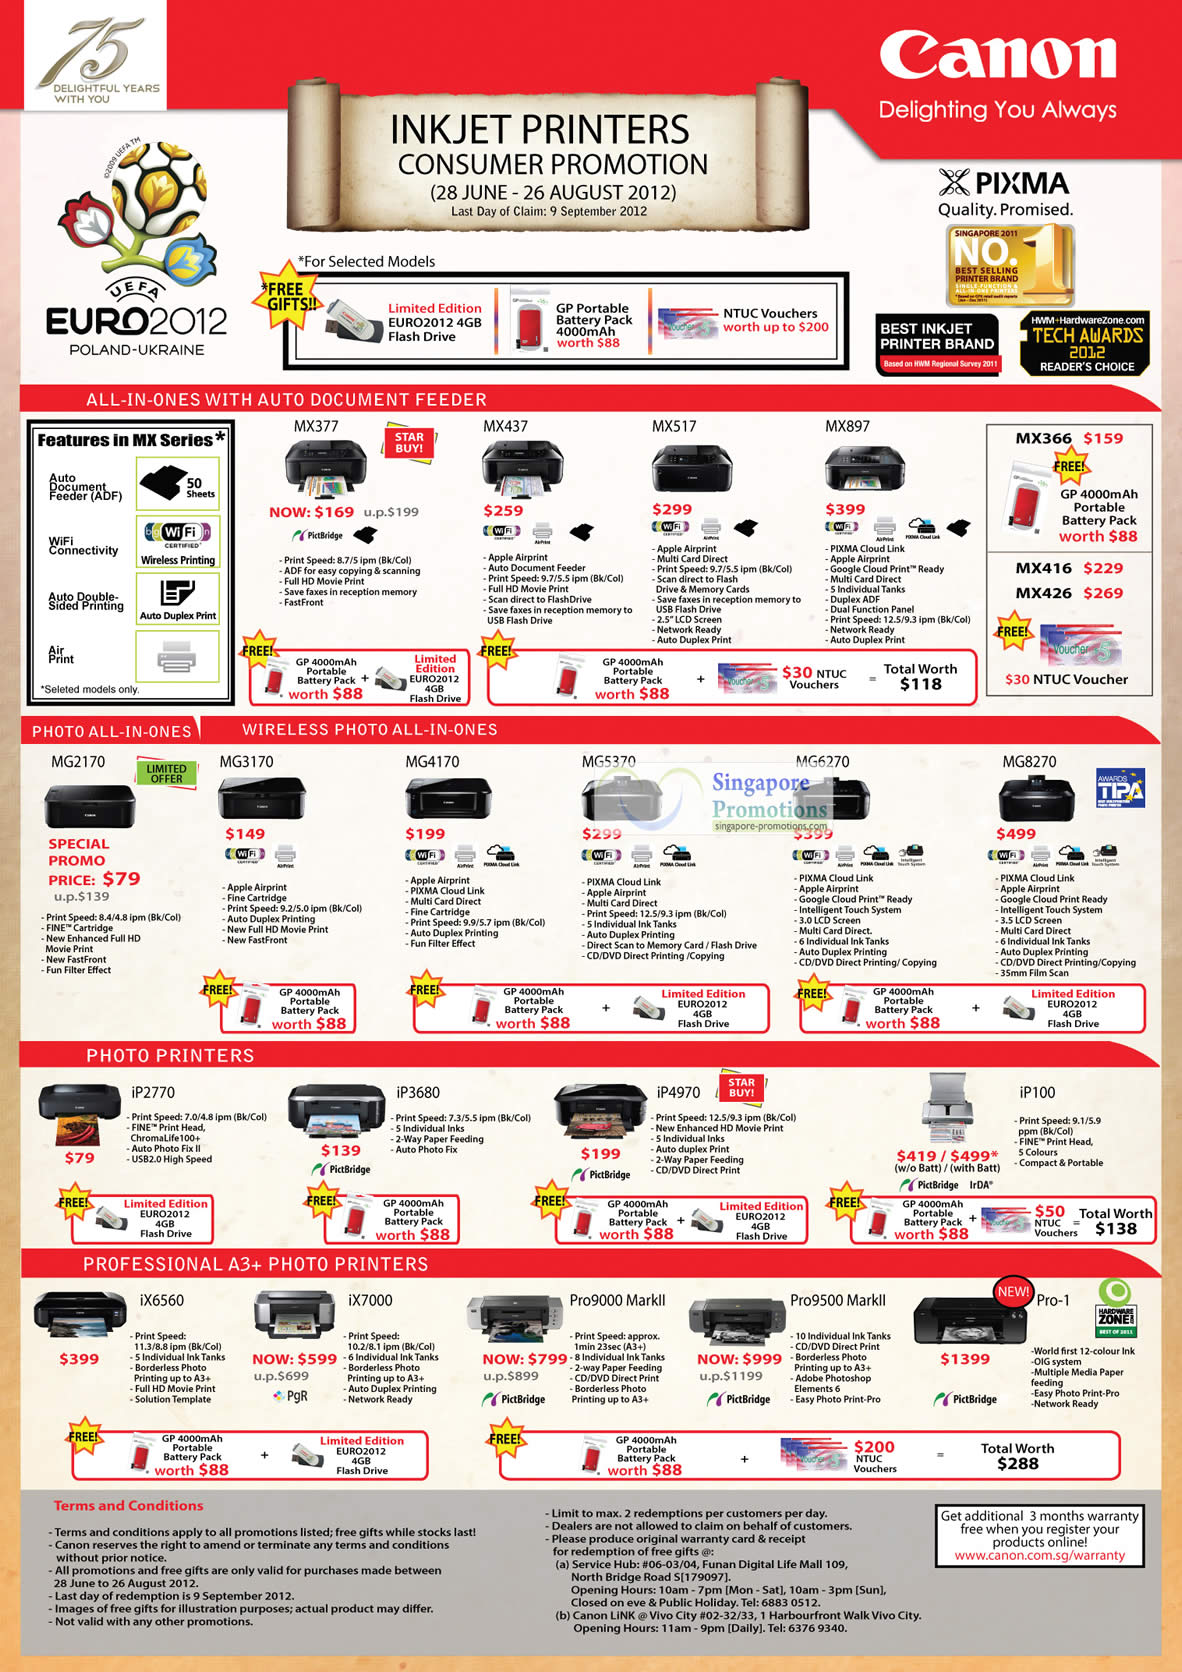 Featured image for Canon Laser Printers, Inkjet Printers & Scanners Promotion Offers 28 Jun - 26 Aug 2012